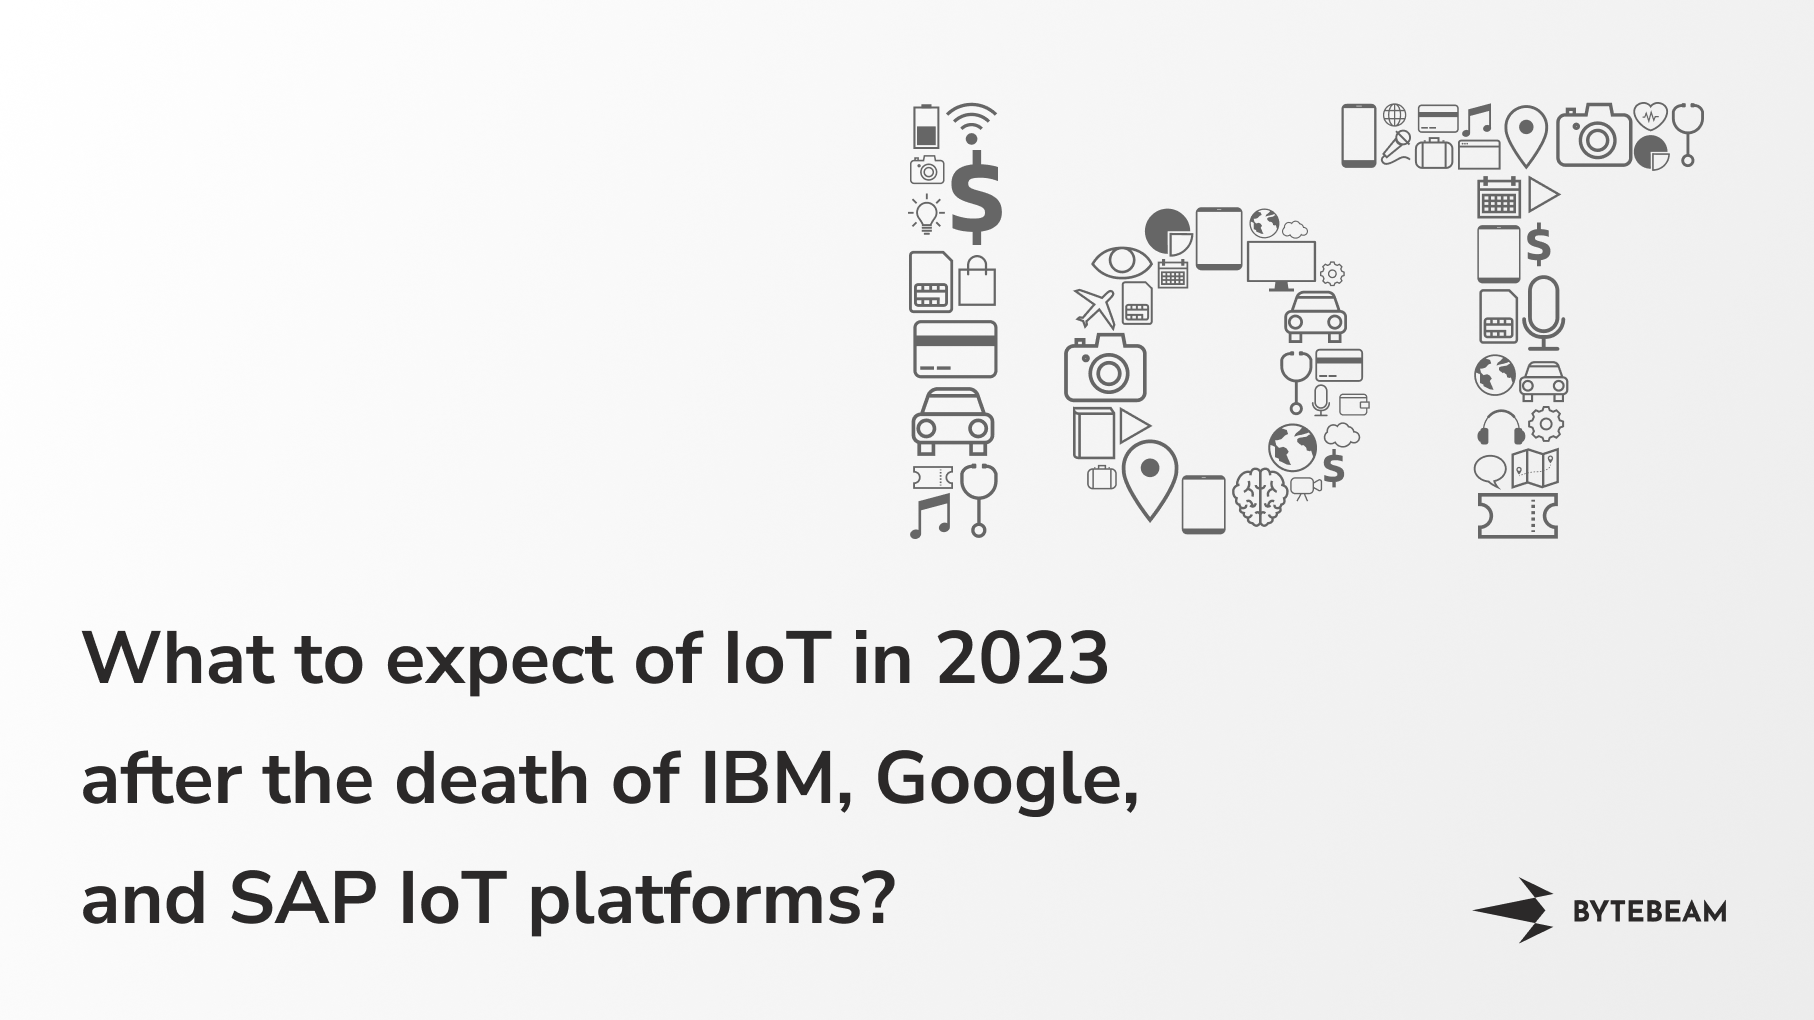 What to expect of IoT in 2023 after the death of IBM, Google, and SAP IoT platforms?